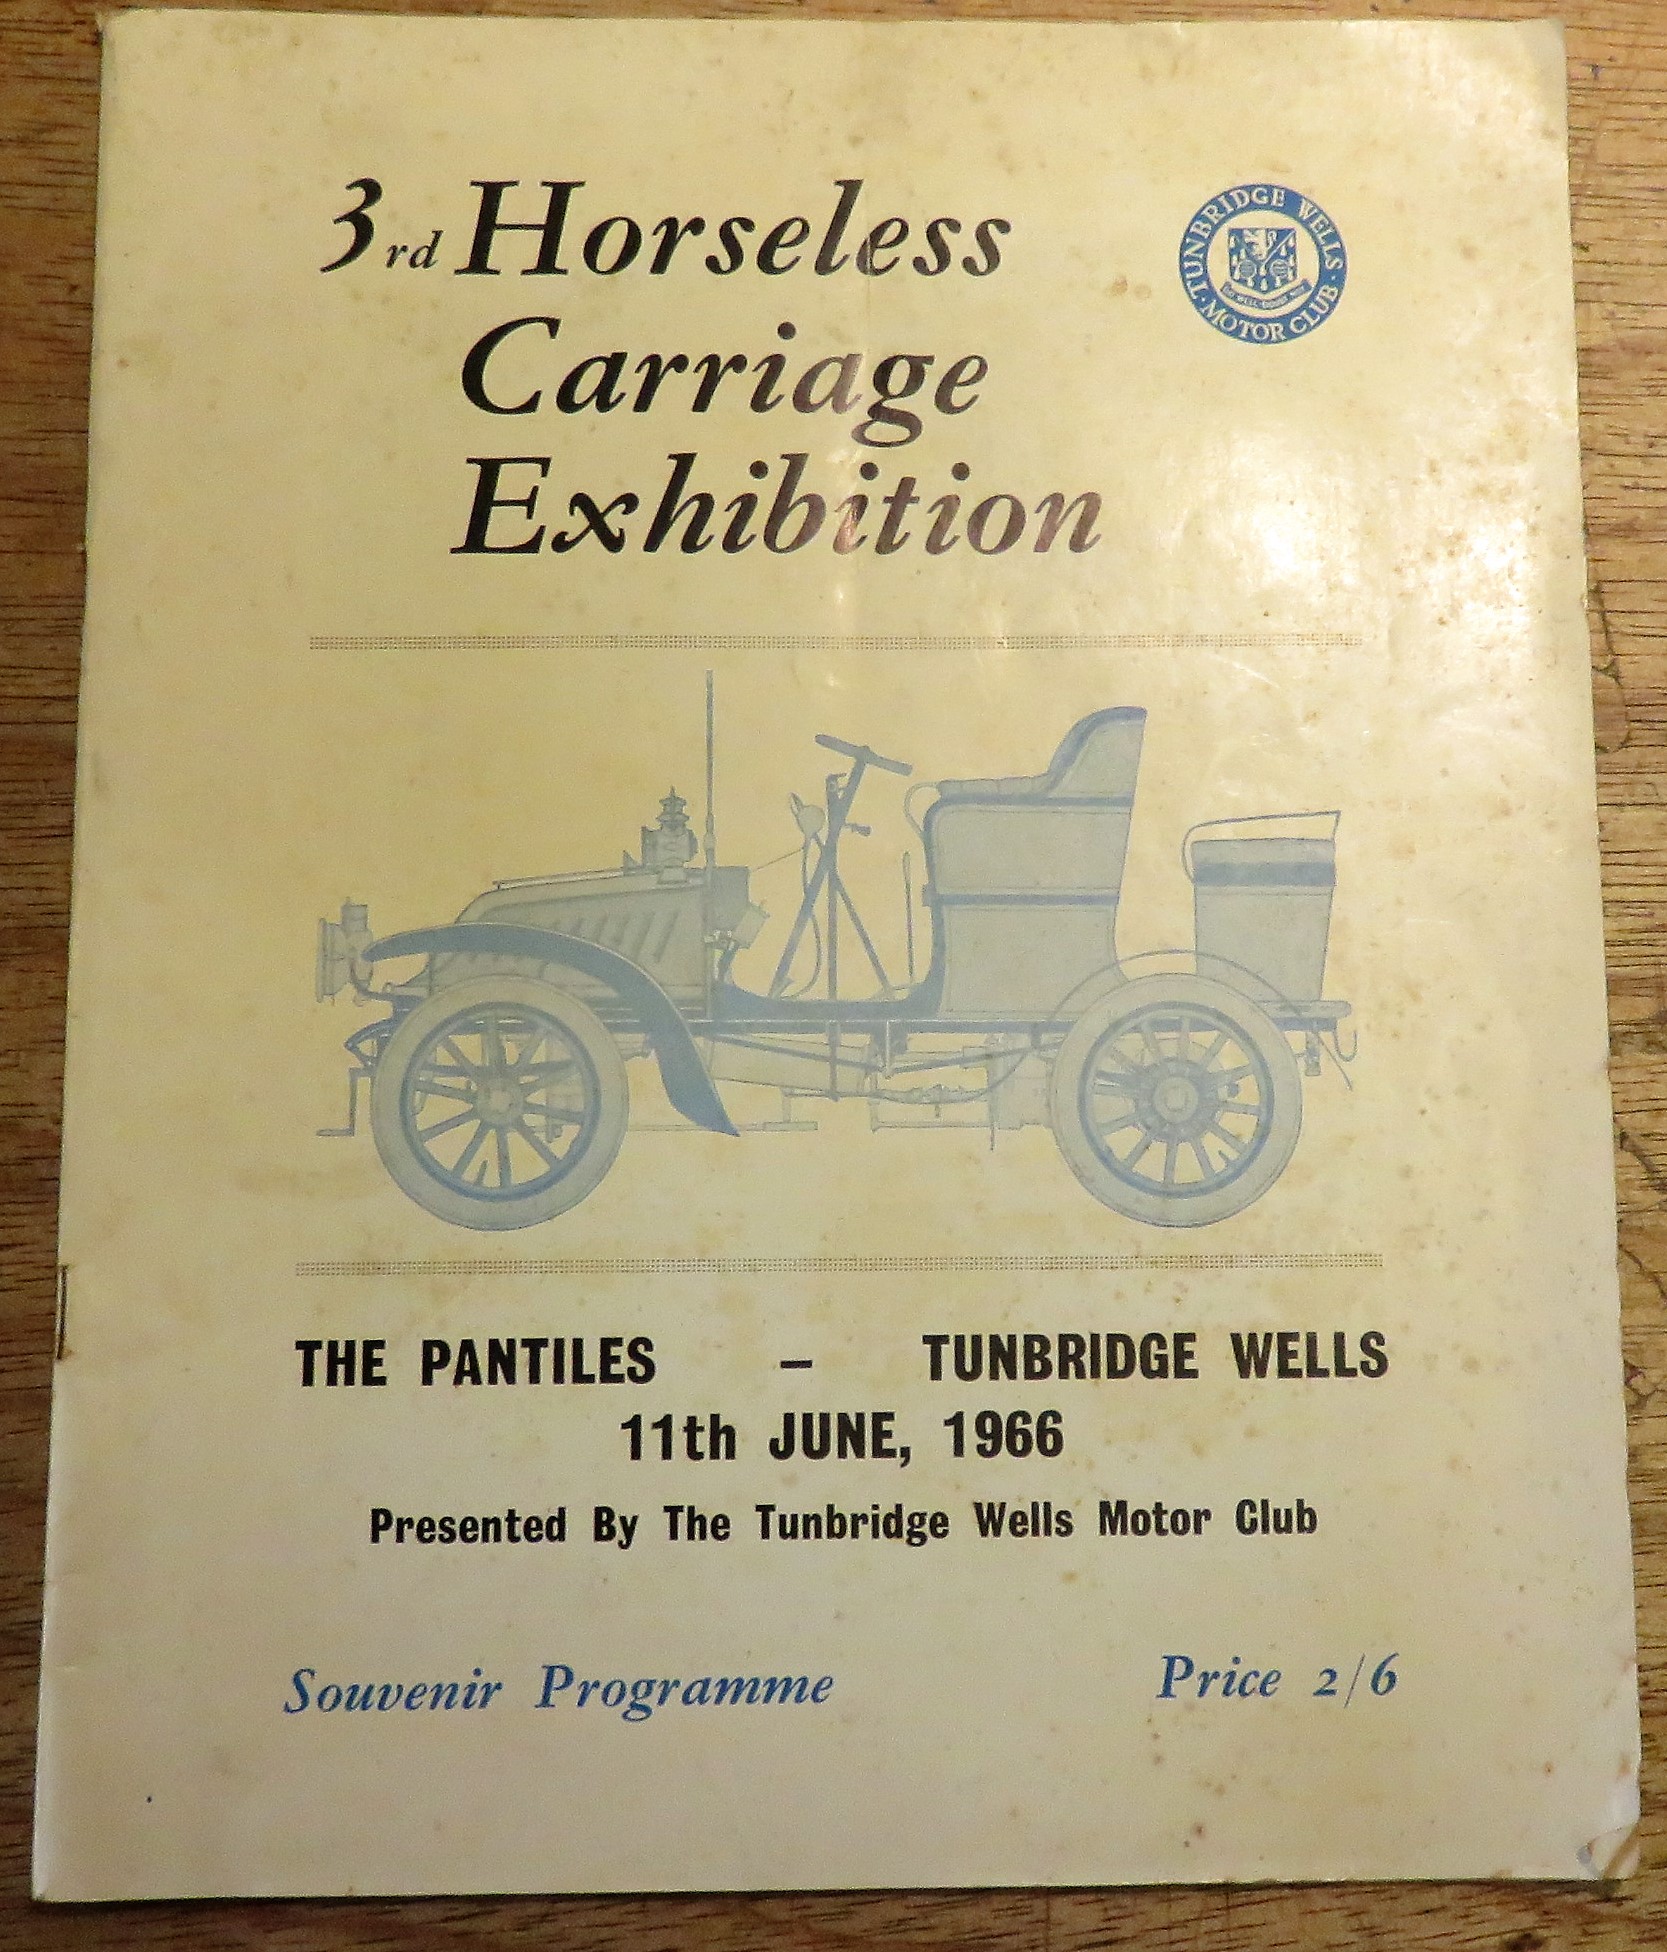 3rd Horseless Carriage Exhibition